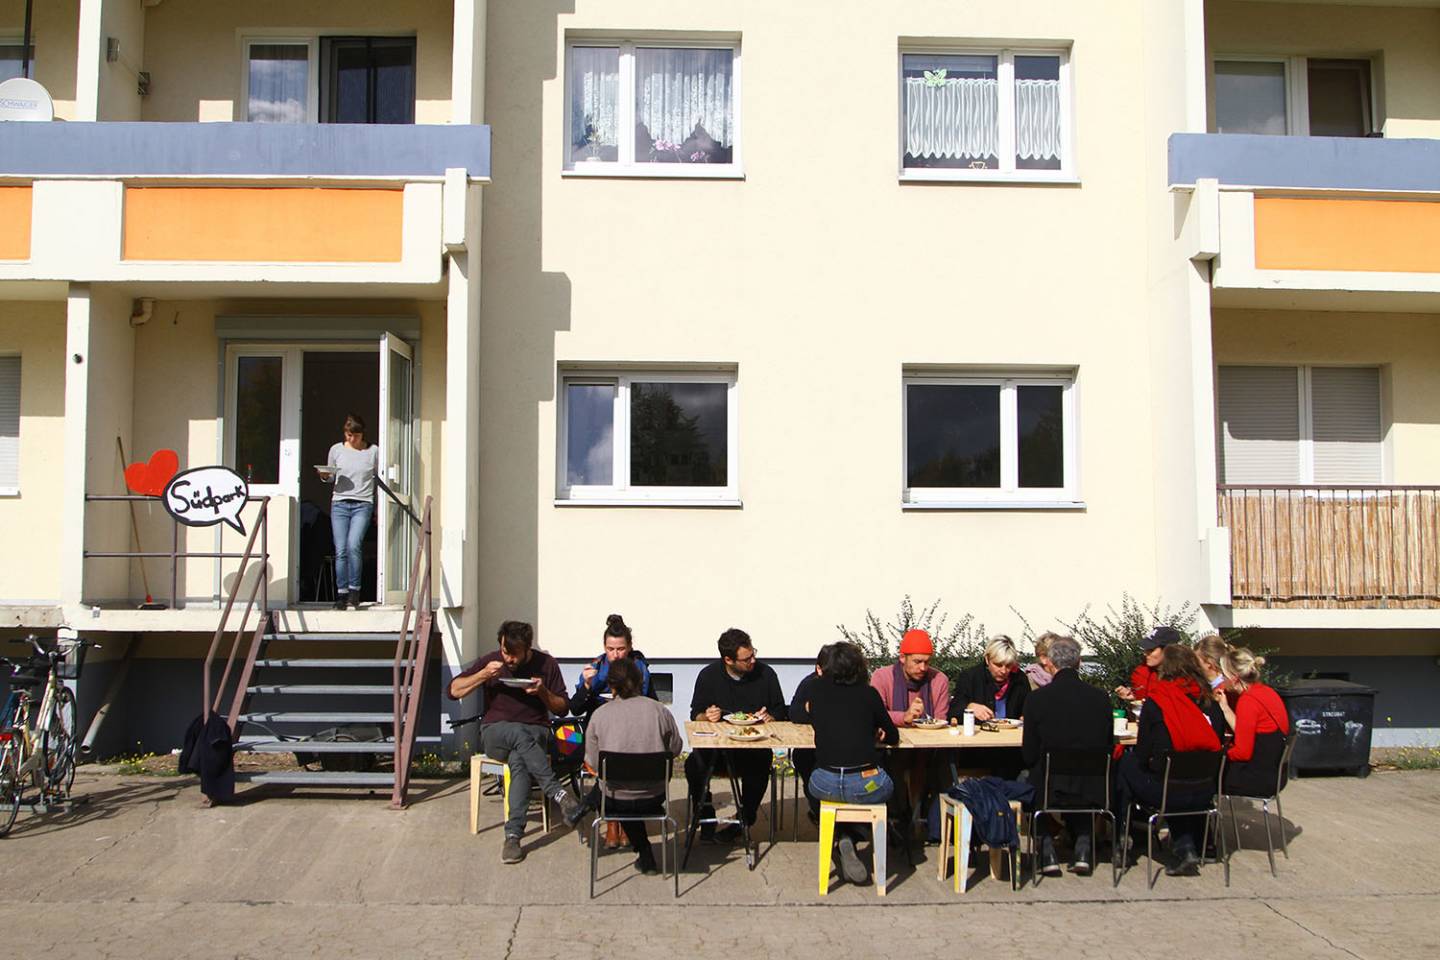 People sitting on a table in front of a GDR block and having lunch.